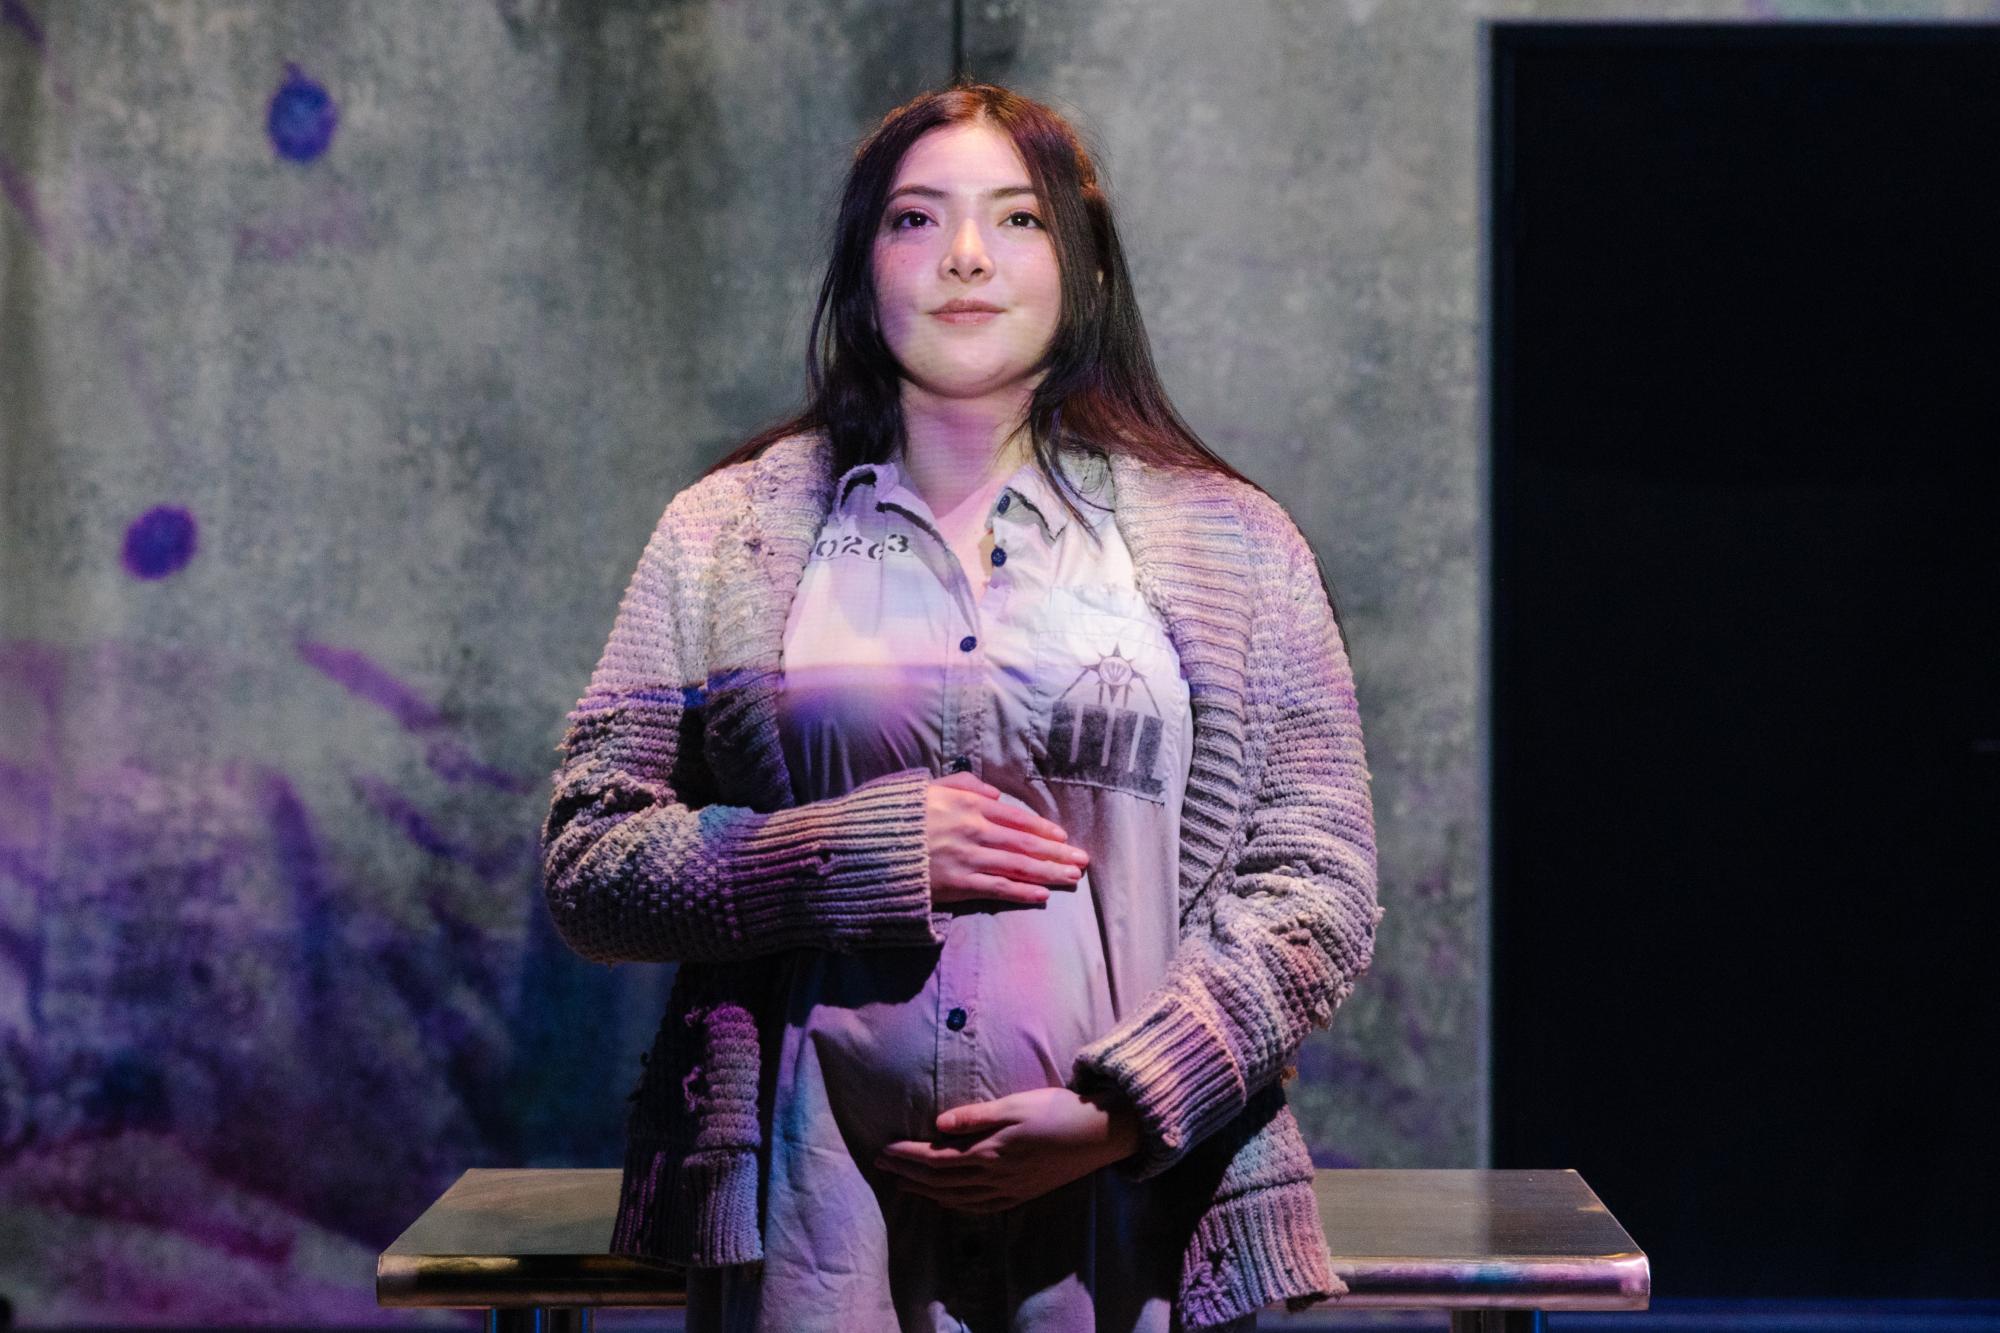 actress with her hands on her baby bump looks confidently out into the audience